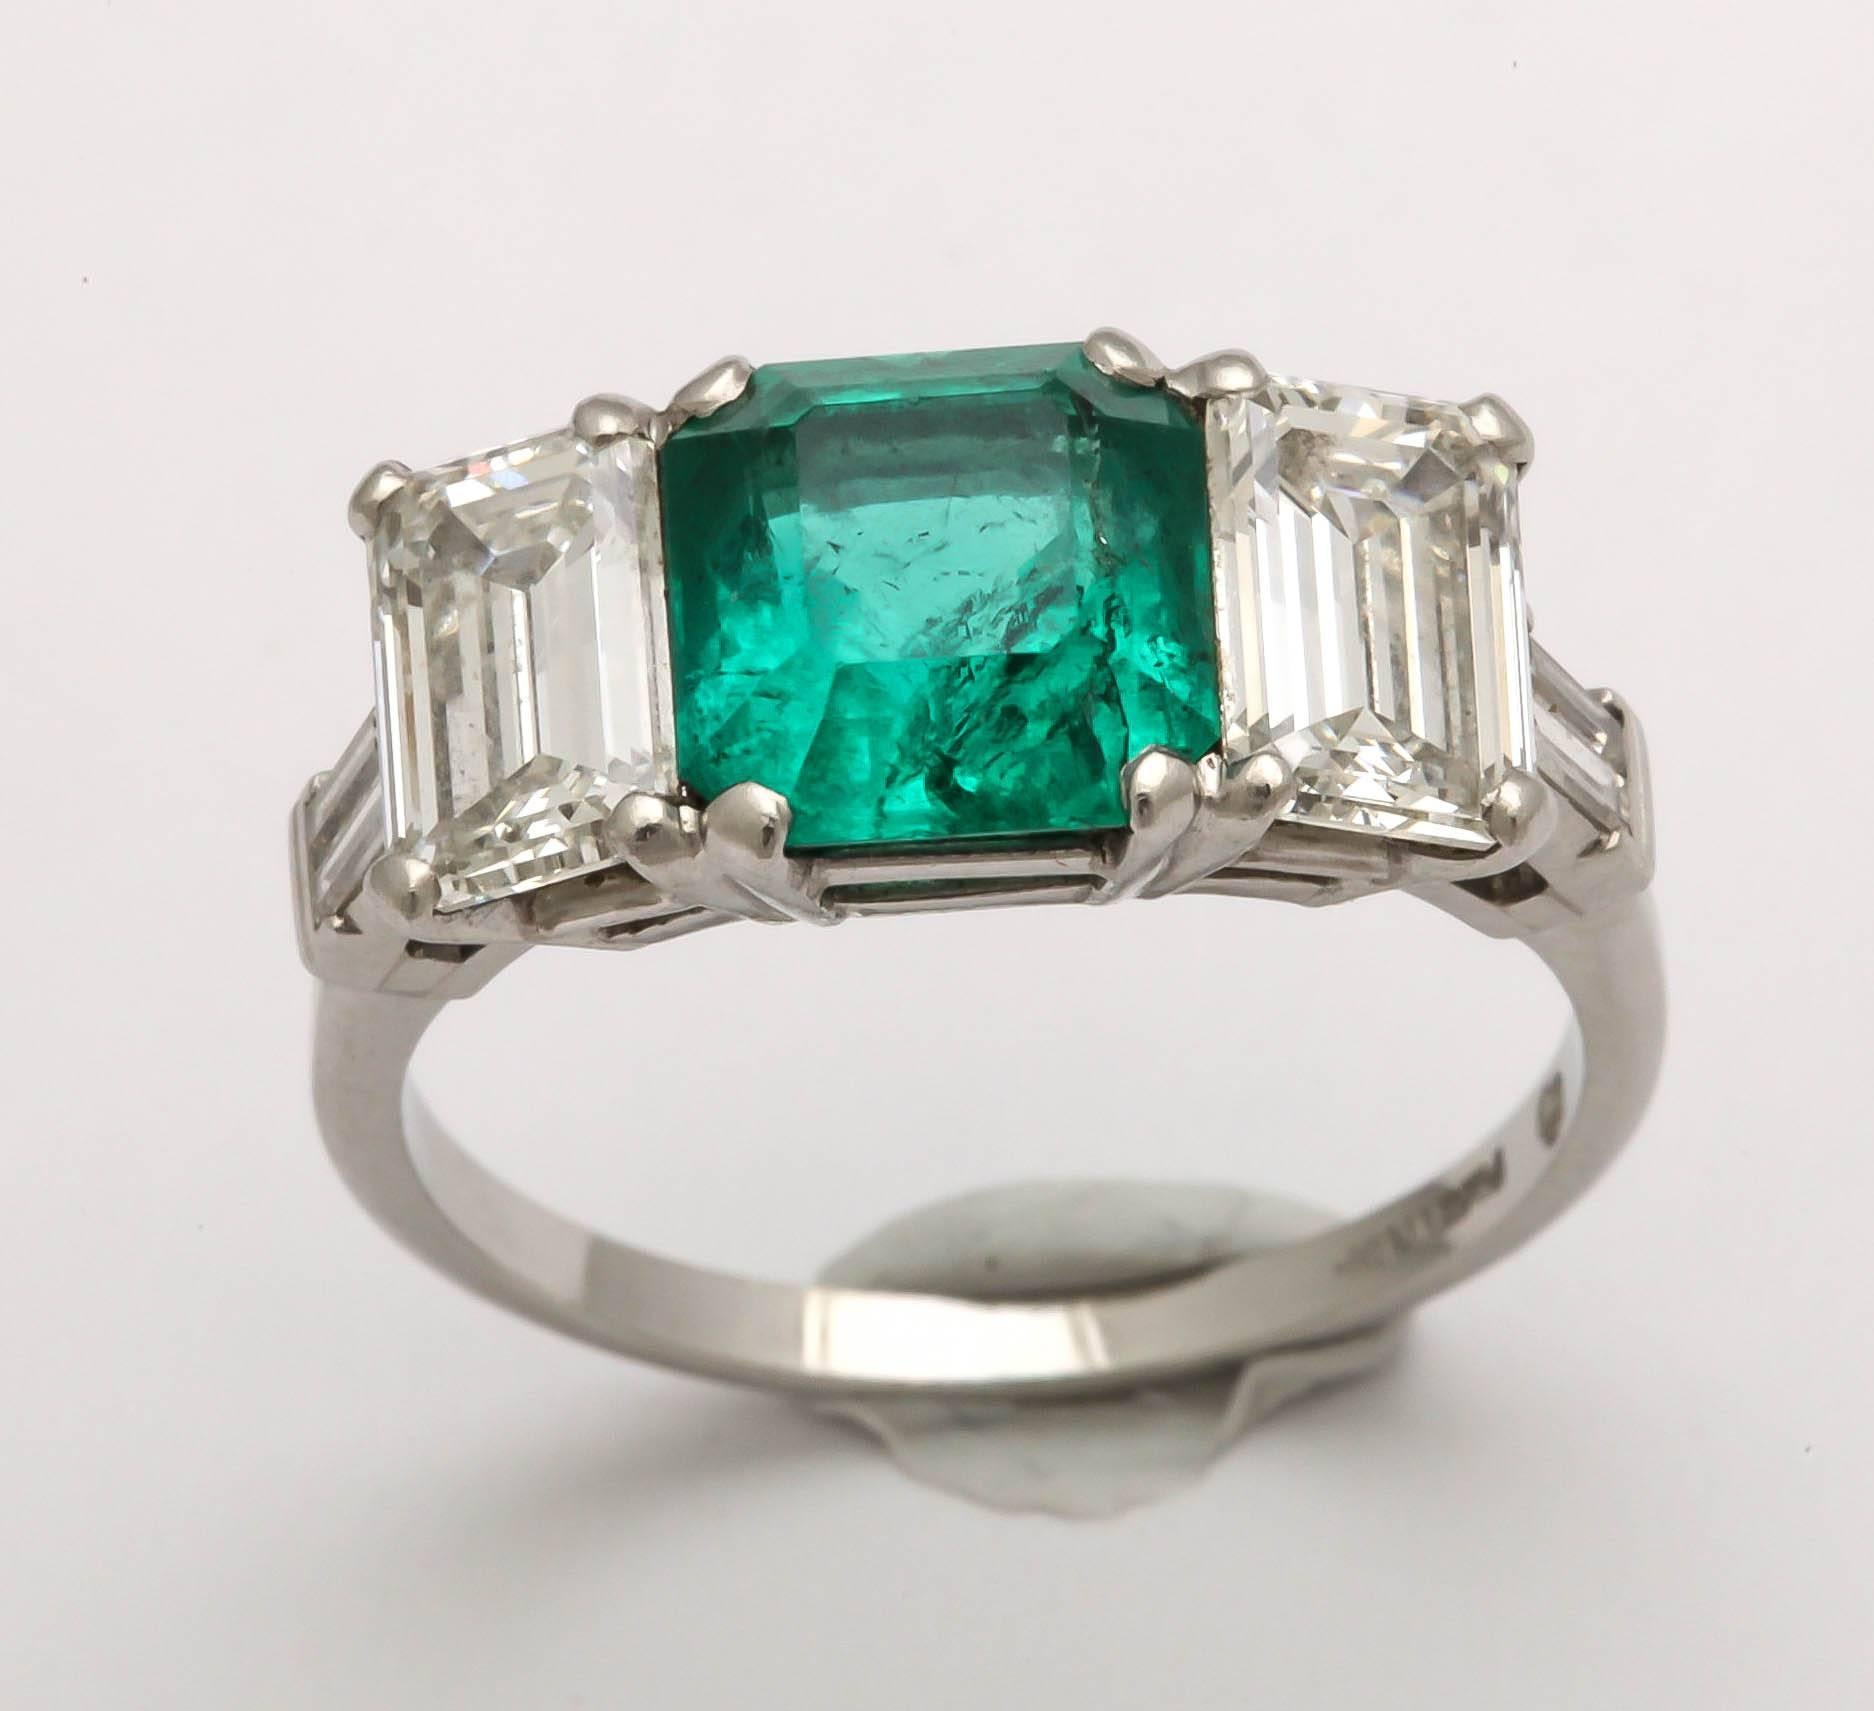 Appraisal Report: A stunning Art Deco ring with a vintage Colombian 2.50-carat medium tone strong saturation Emerald. Flanked by two Emerald 1-carat diamonds VVS/VS color G/H  along with two smaller straight baguettes set in platinum. 
As with most